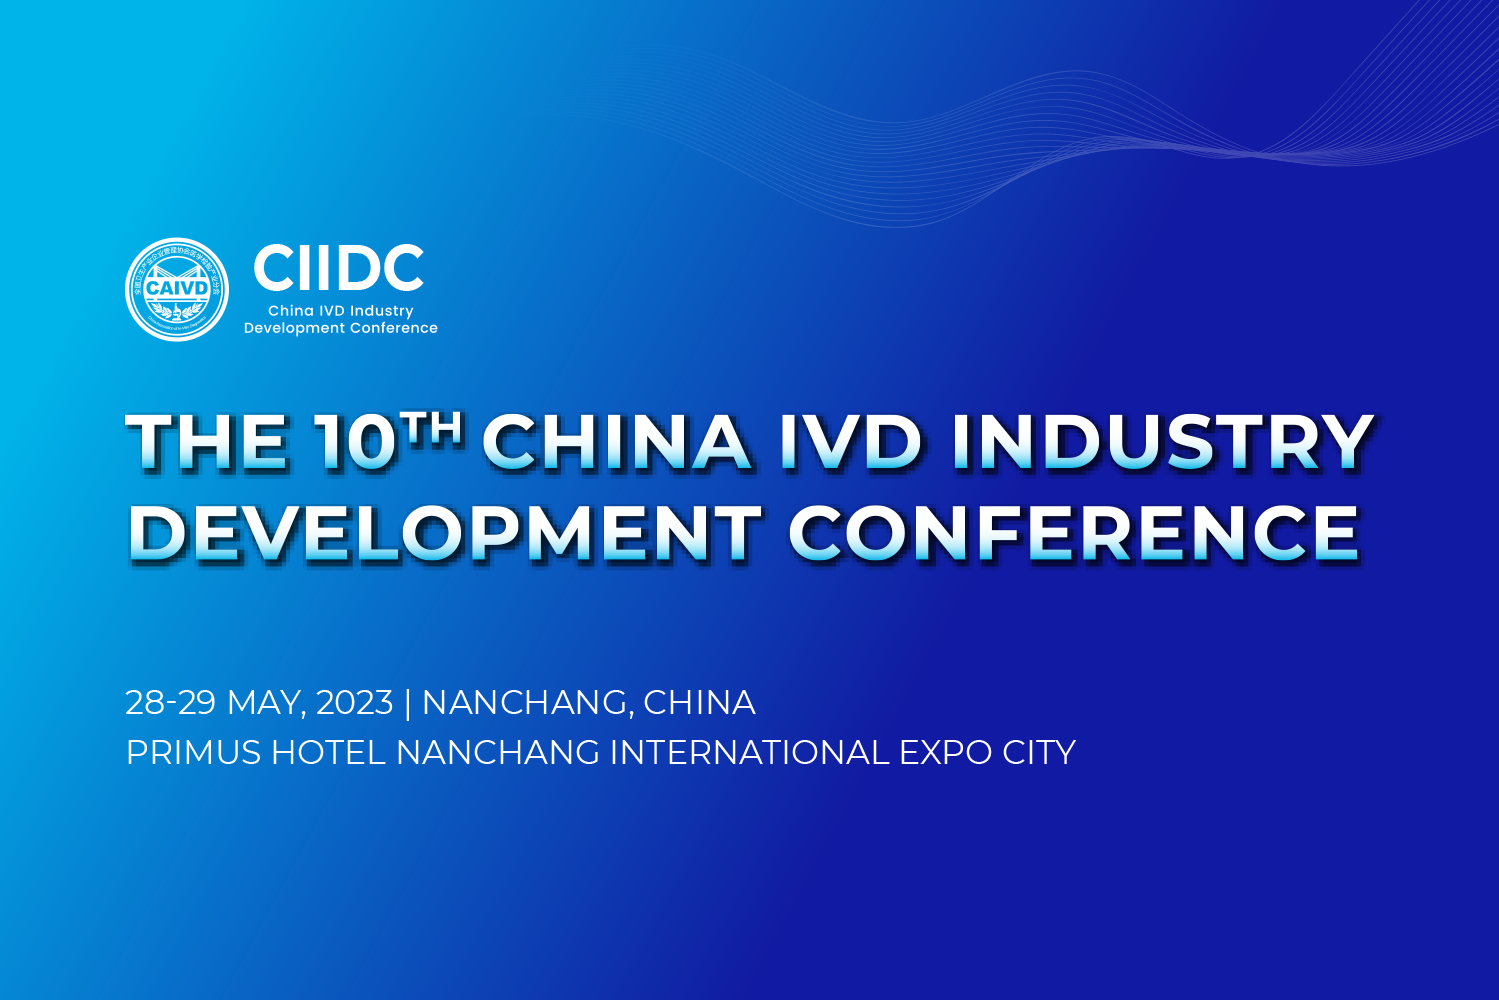 The 10th China IVD Industry Development Conference is planned to open